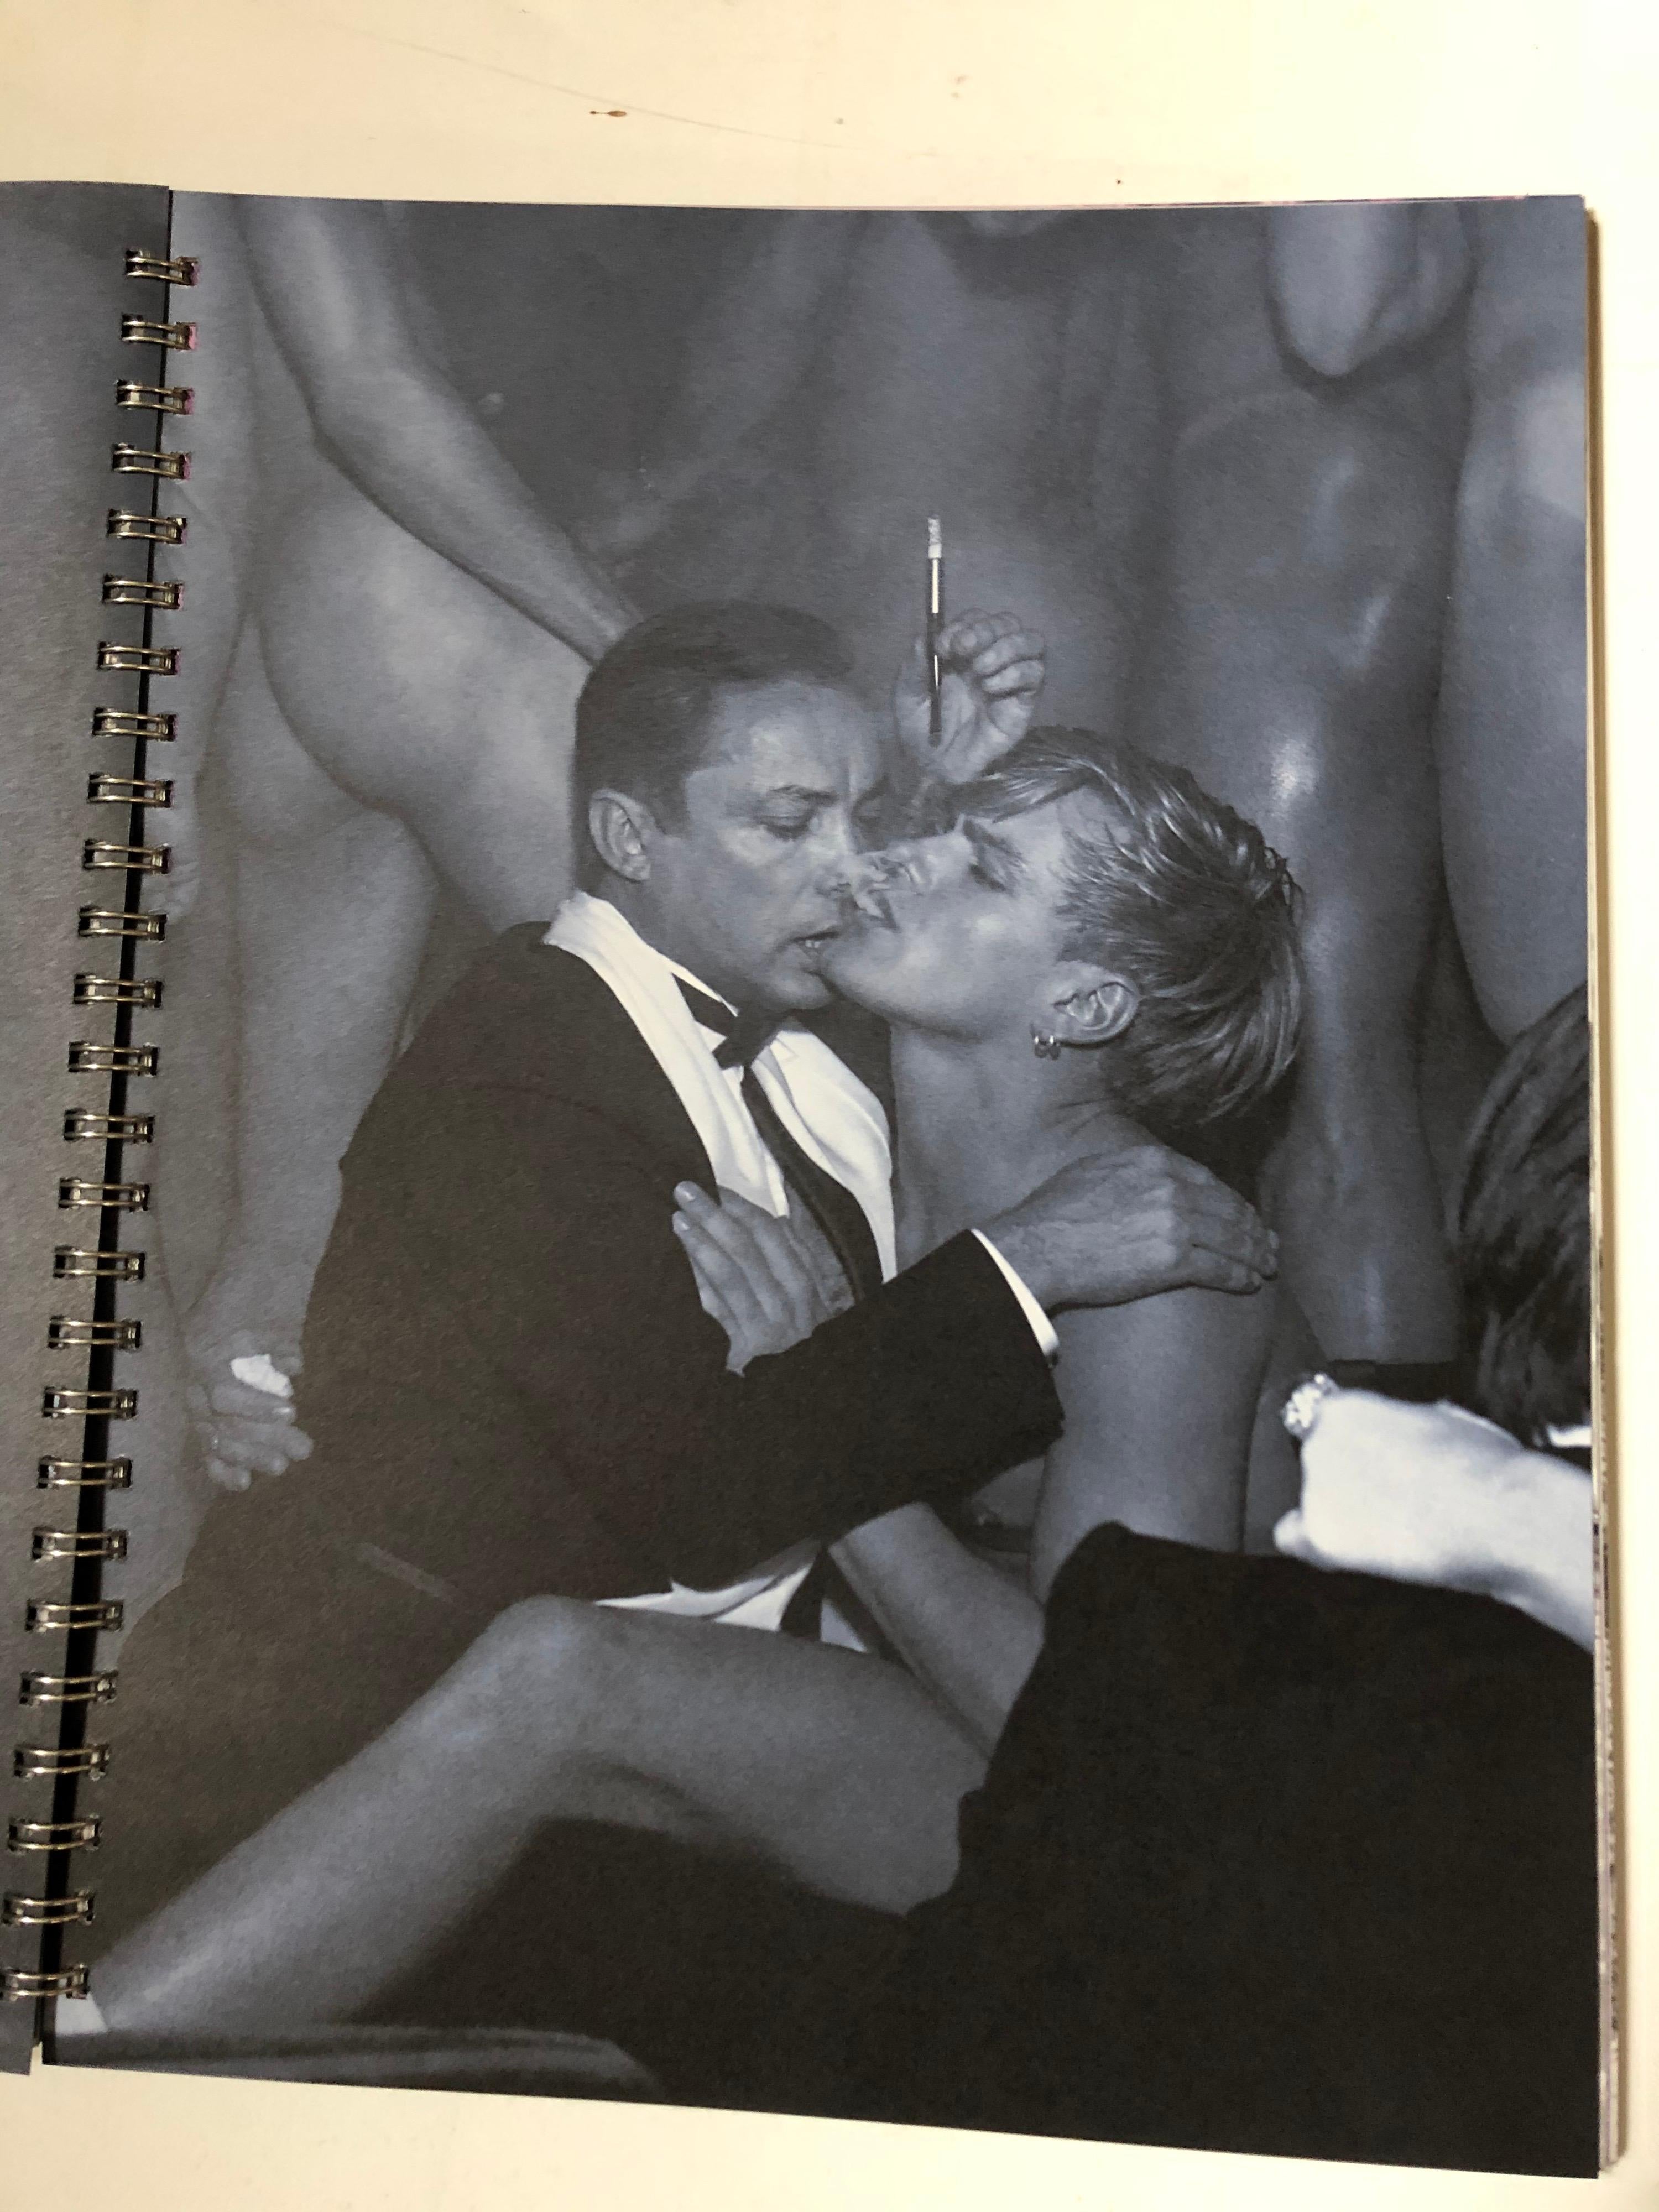 Late 20th Century Madonna 1992 Vade Retro French Edition Sex Book Photographed by Steven Meisel For Sale